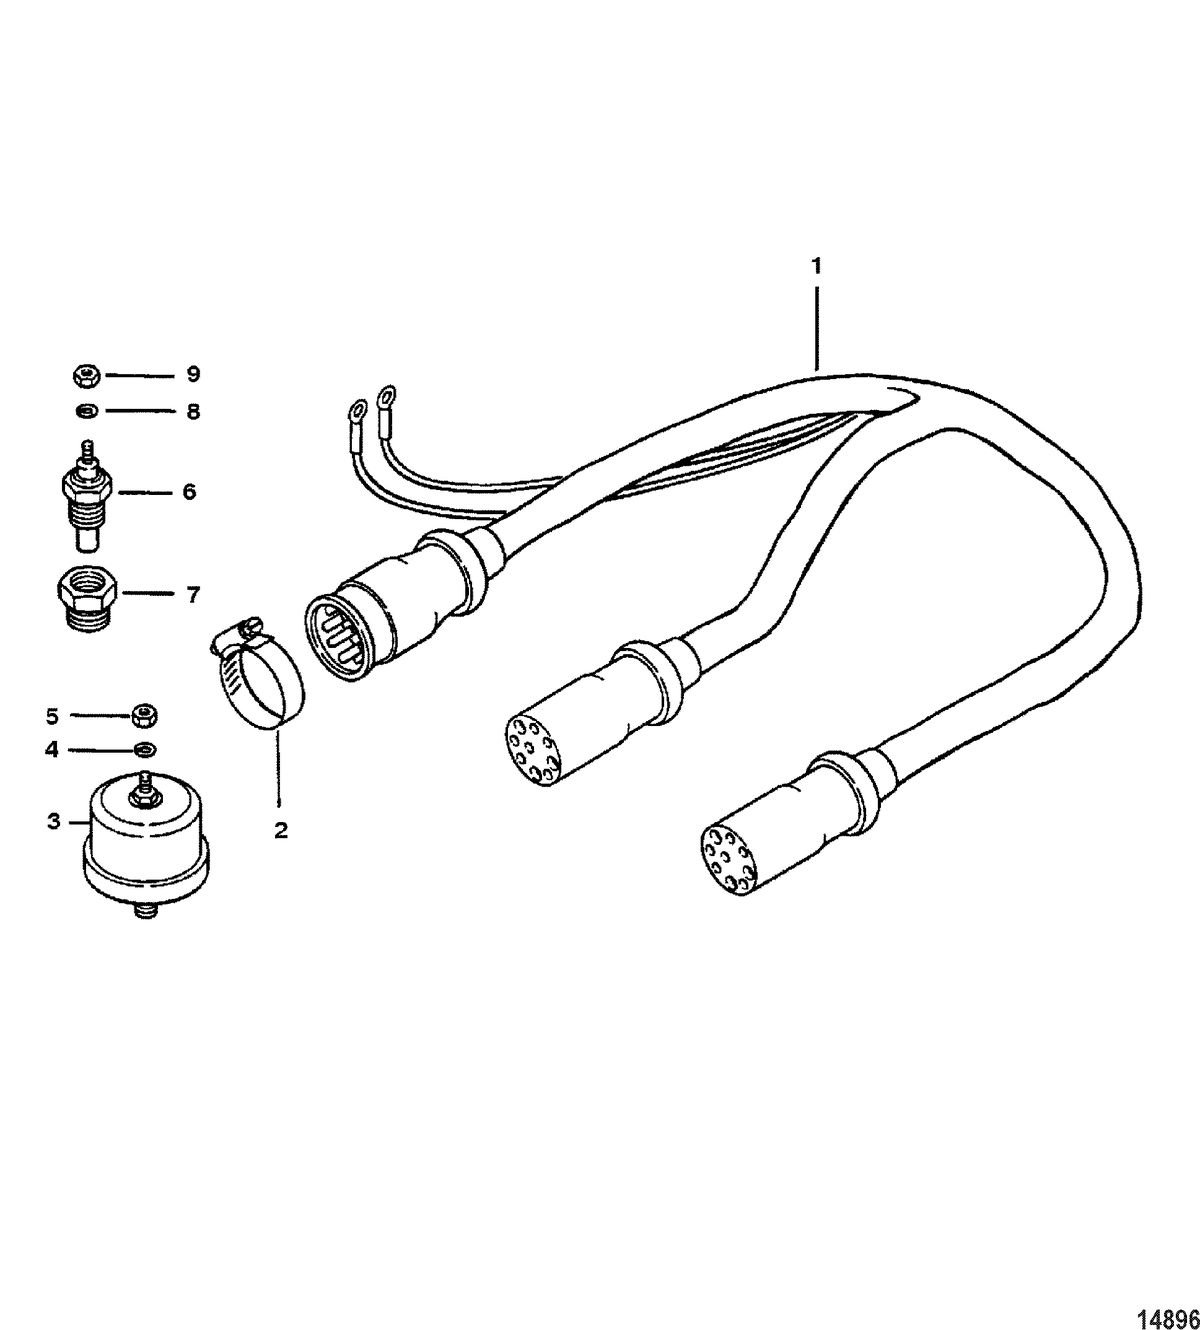 ACCESSORIES ELECTRICAL COMPONENTS AND HARNESSES Harness Kit(Instrumentation-Dual)